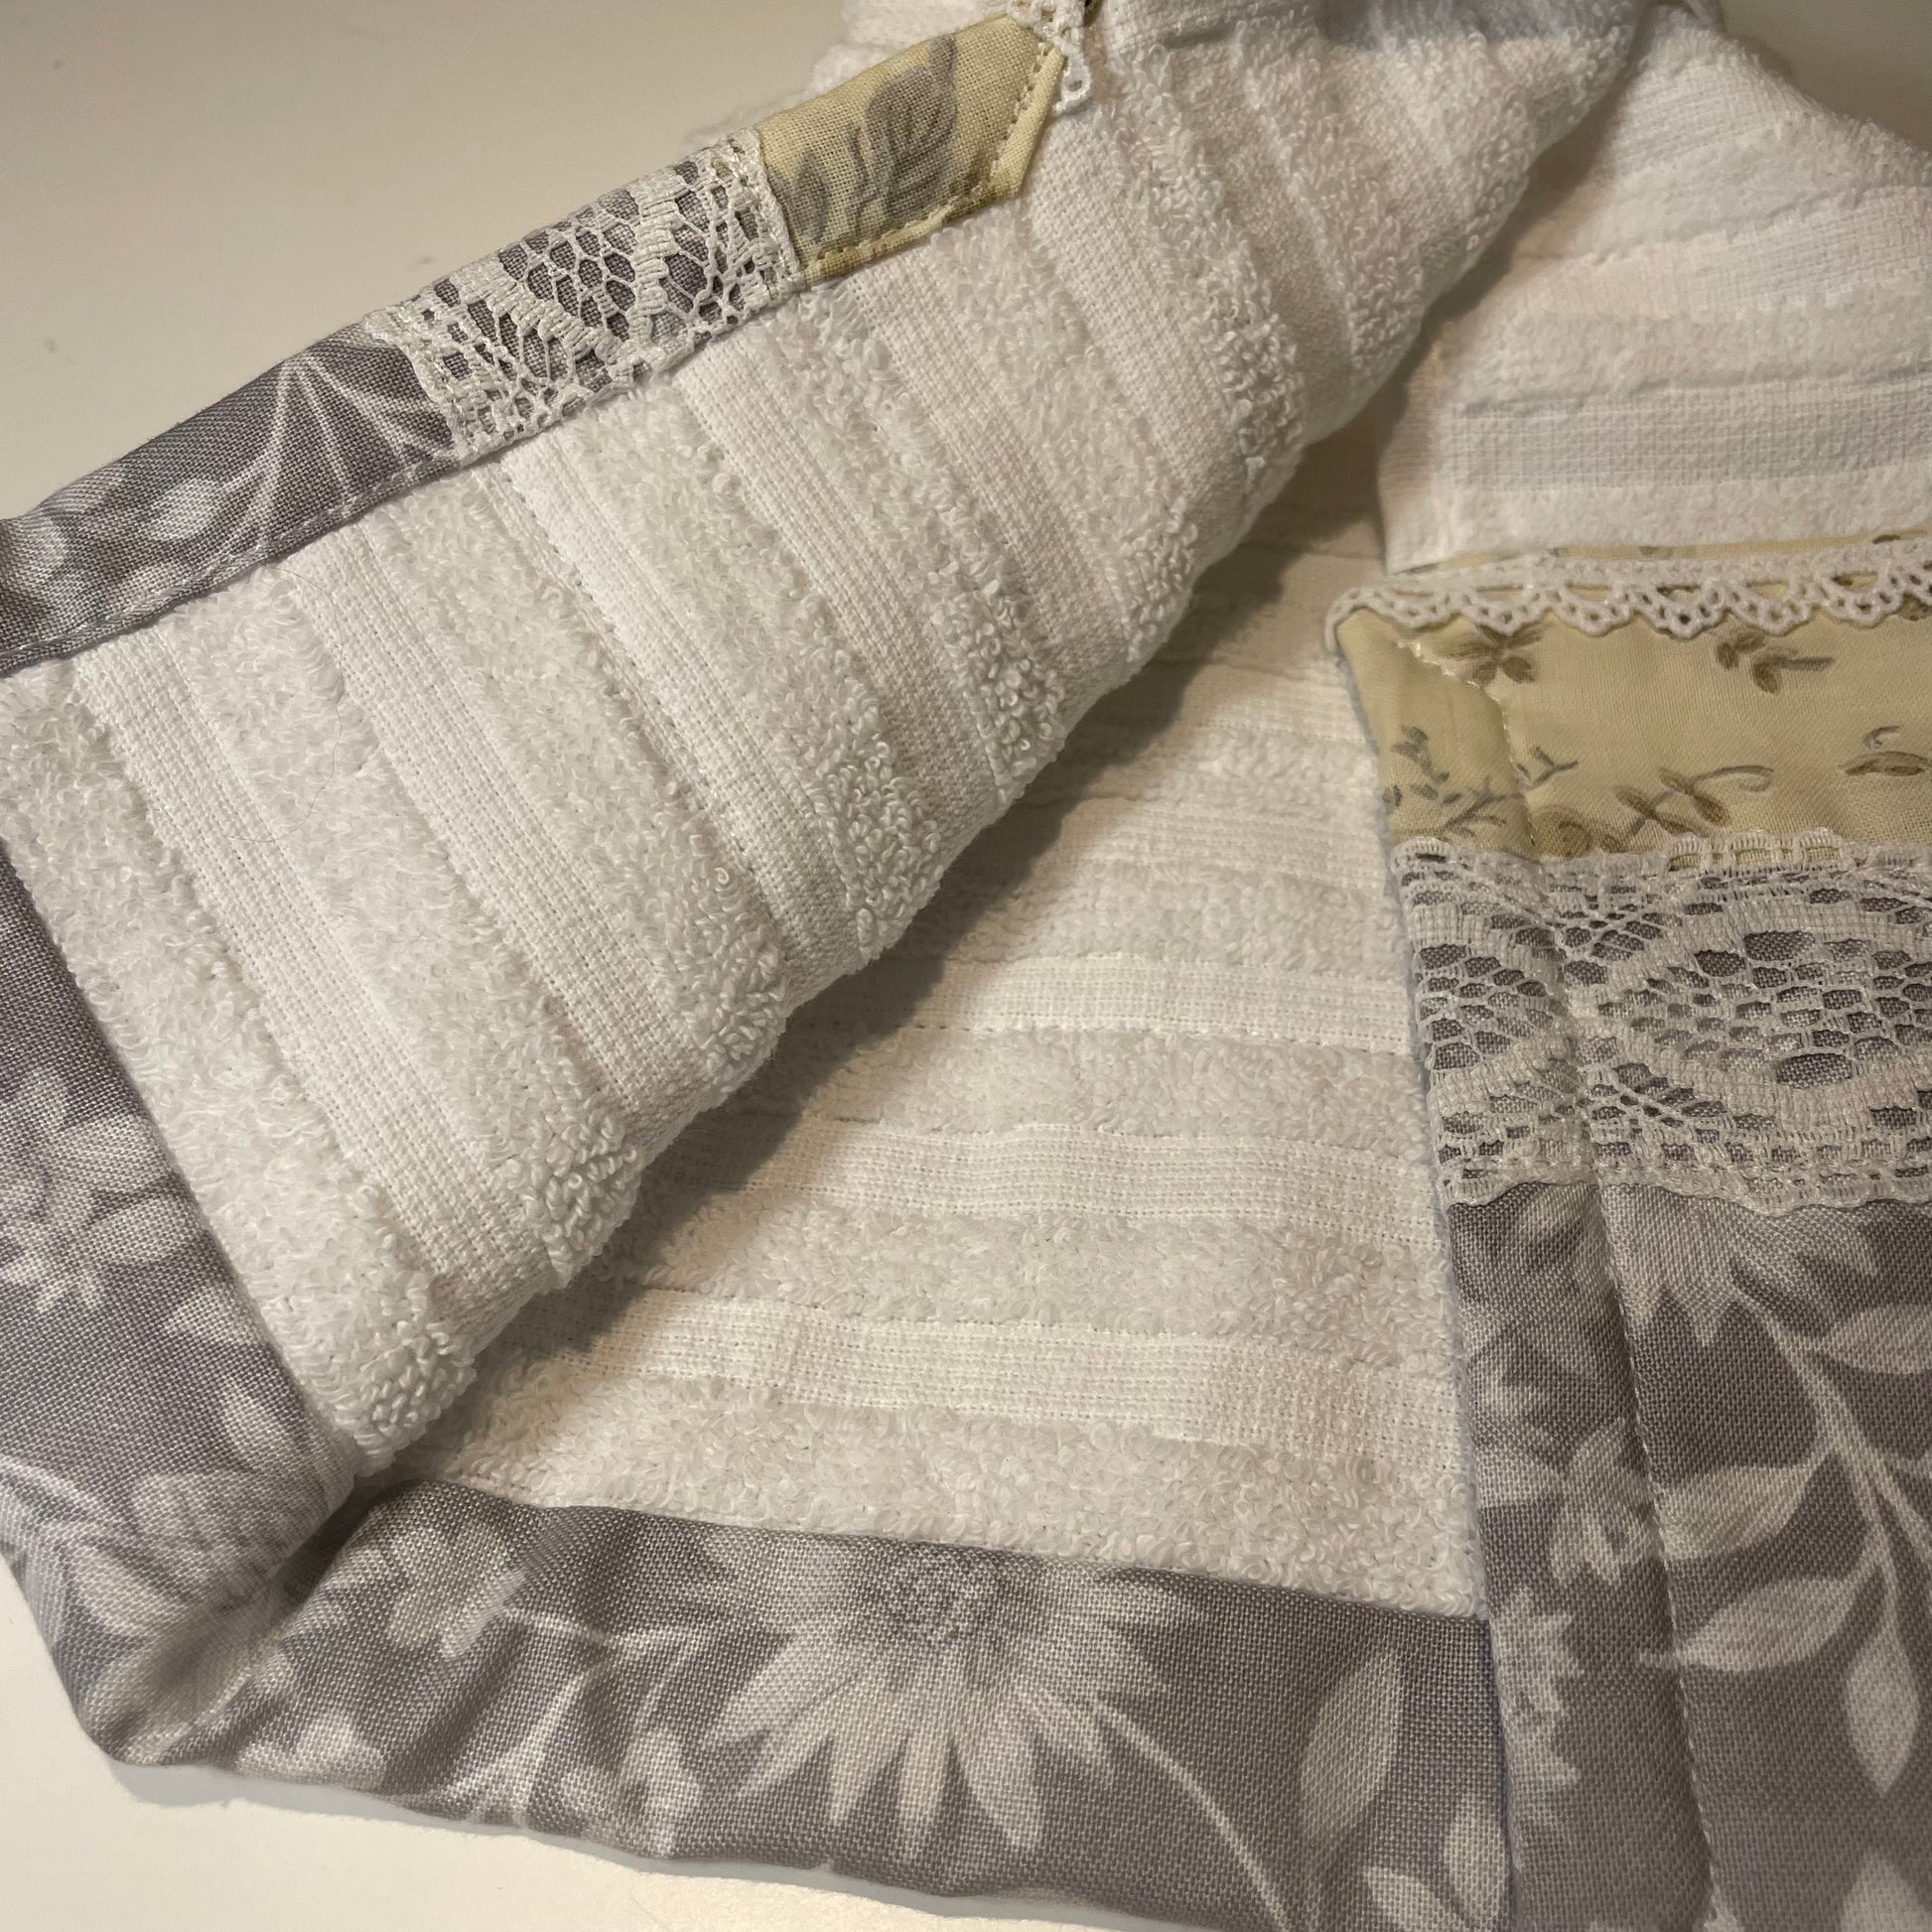 Grey and White Handmade Modern Farmhouse Tea Towel. Part of a mix and match collection of coordinating farmhouse home decor. Check it out at Home Stitchery Decor and be sure to check out the Home Stitchery Decor YouTube Channel